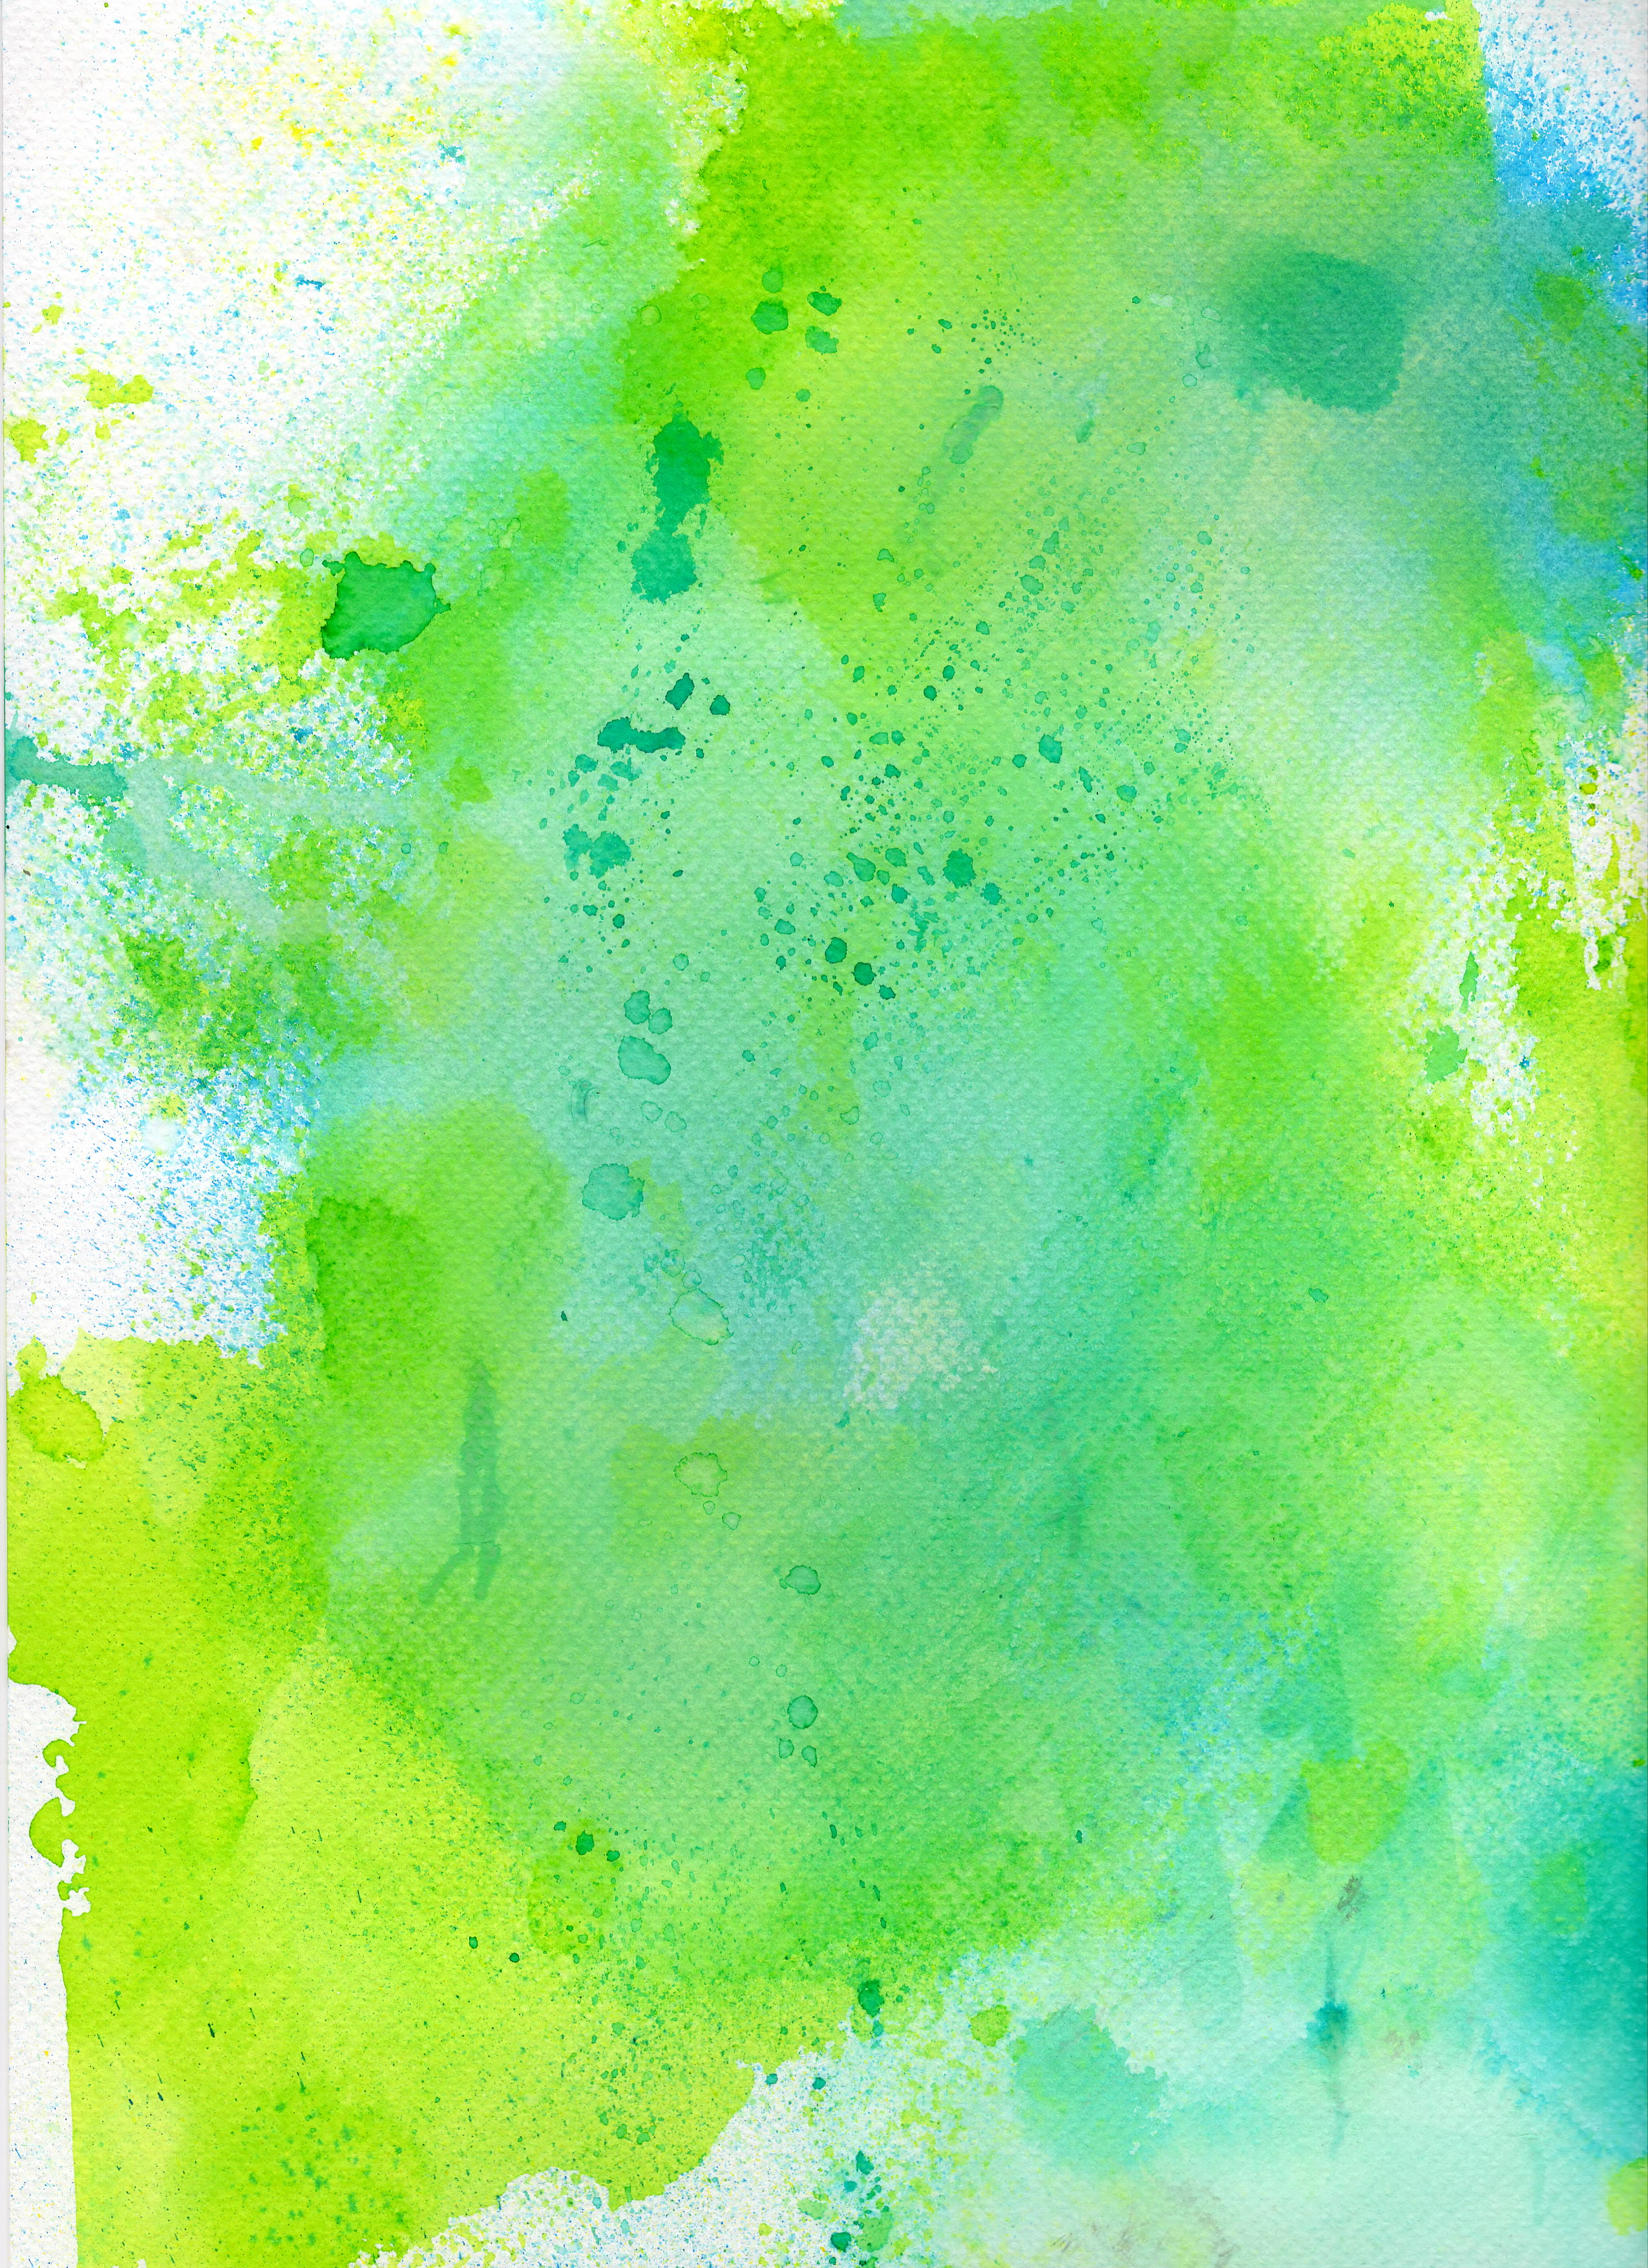 Gallery For Gt Green Watercolor Background